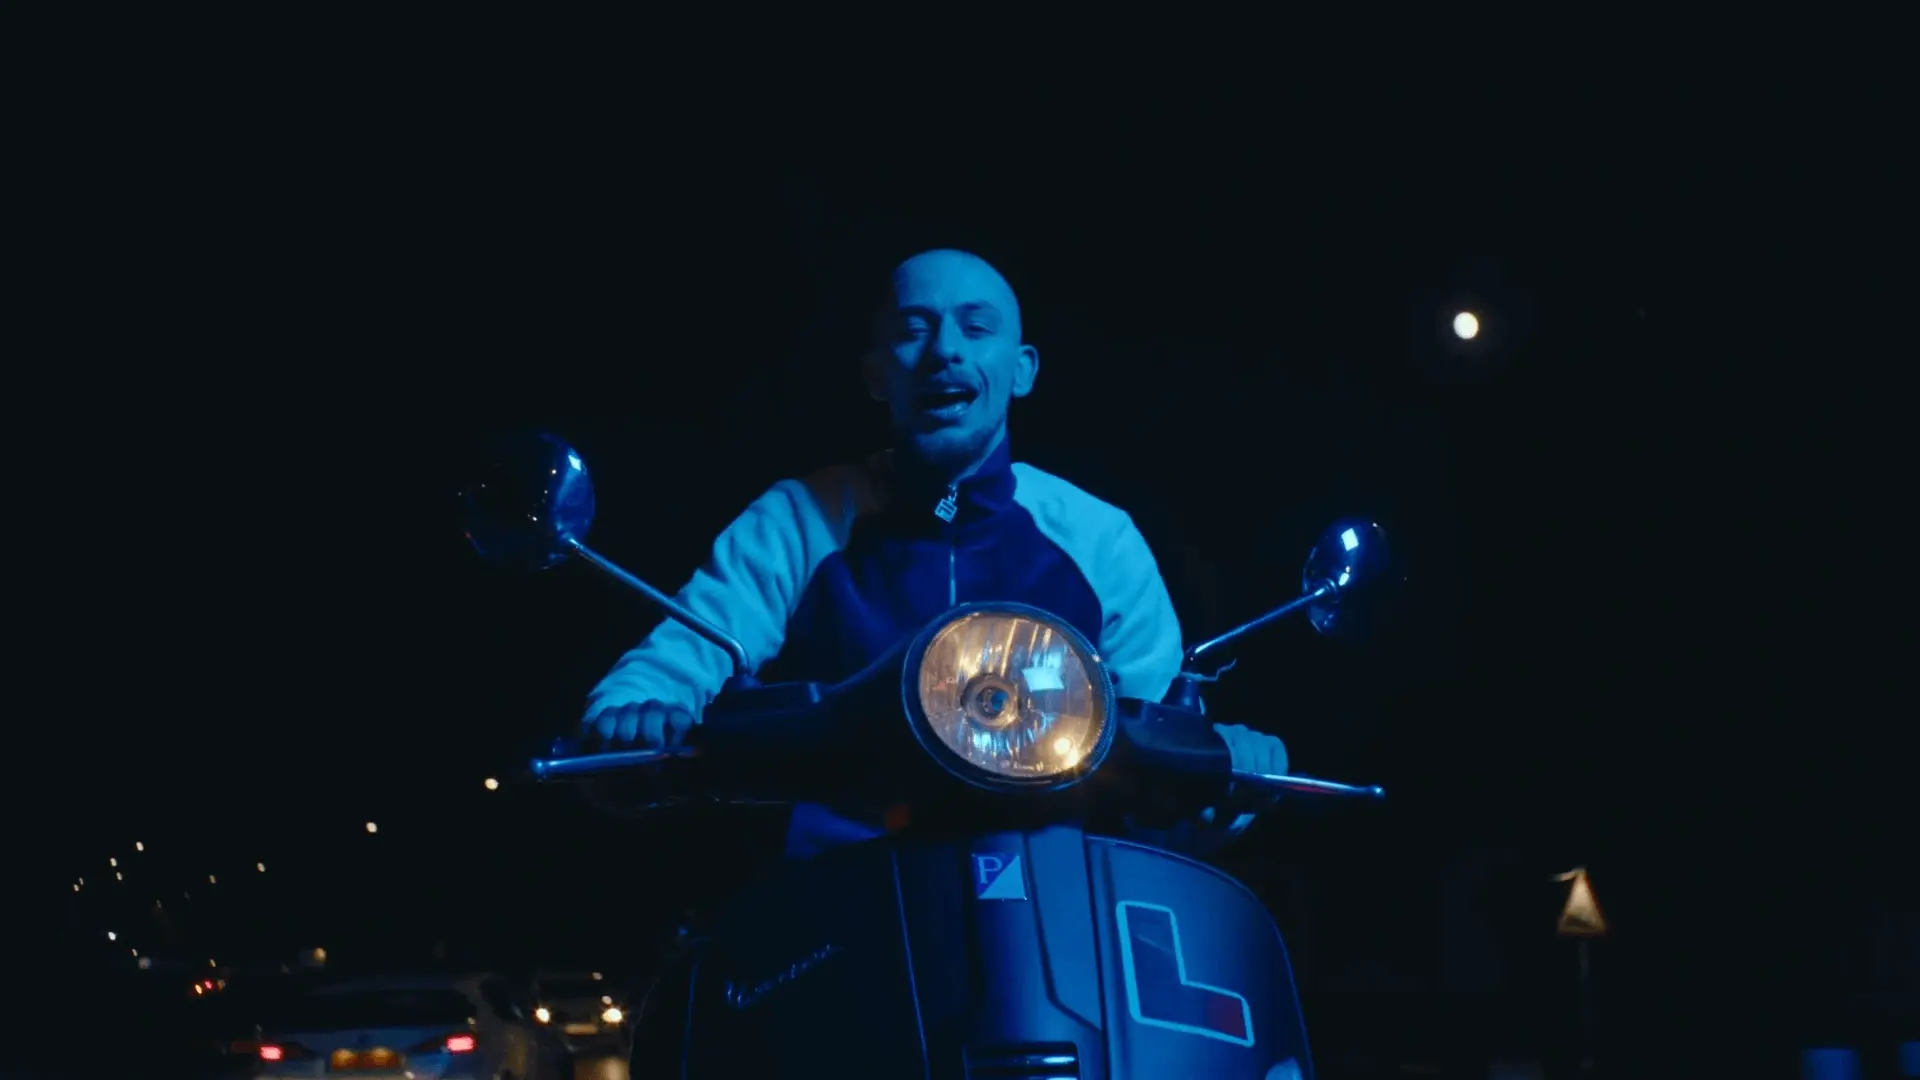 Screenshot from the 'Round Here' music video by Finn Foxell with cinematography by Chaimaa Ormazabal (Chaimuki). Image shows Finn riding a motorbike in the night streets drenched in blue lighting.